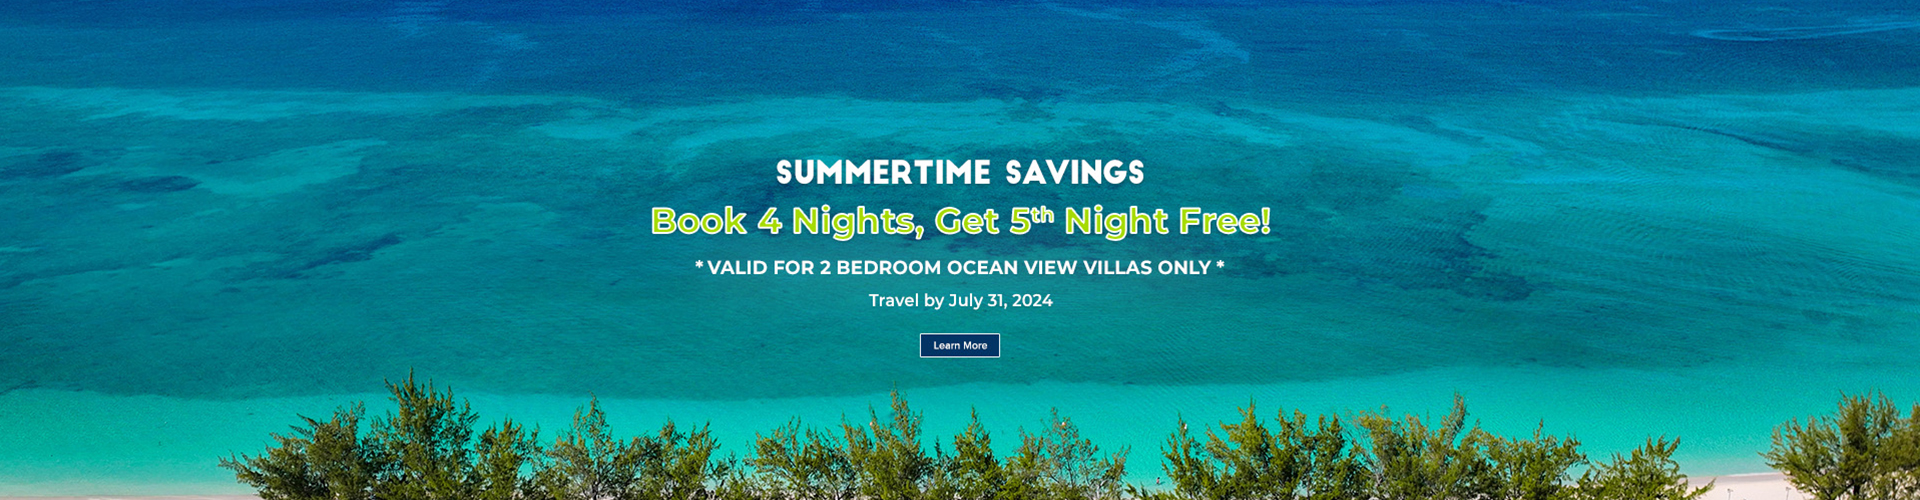 Summer savings banner for pay for 4 , stay 5 nights promo